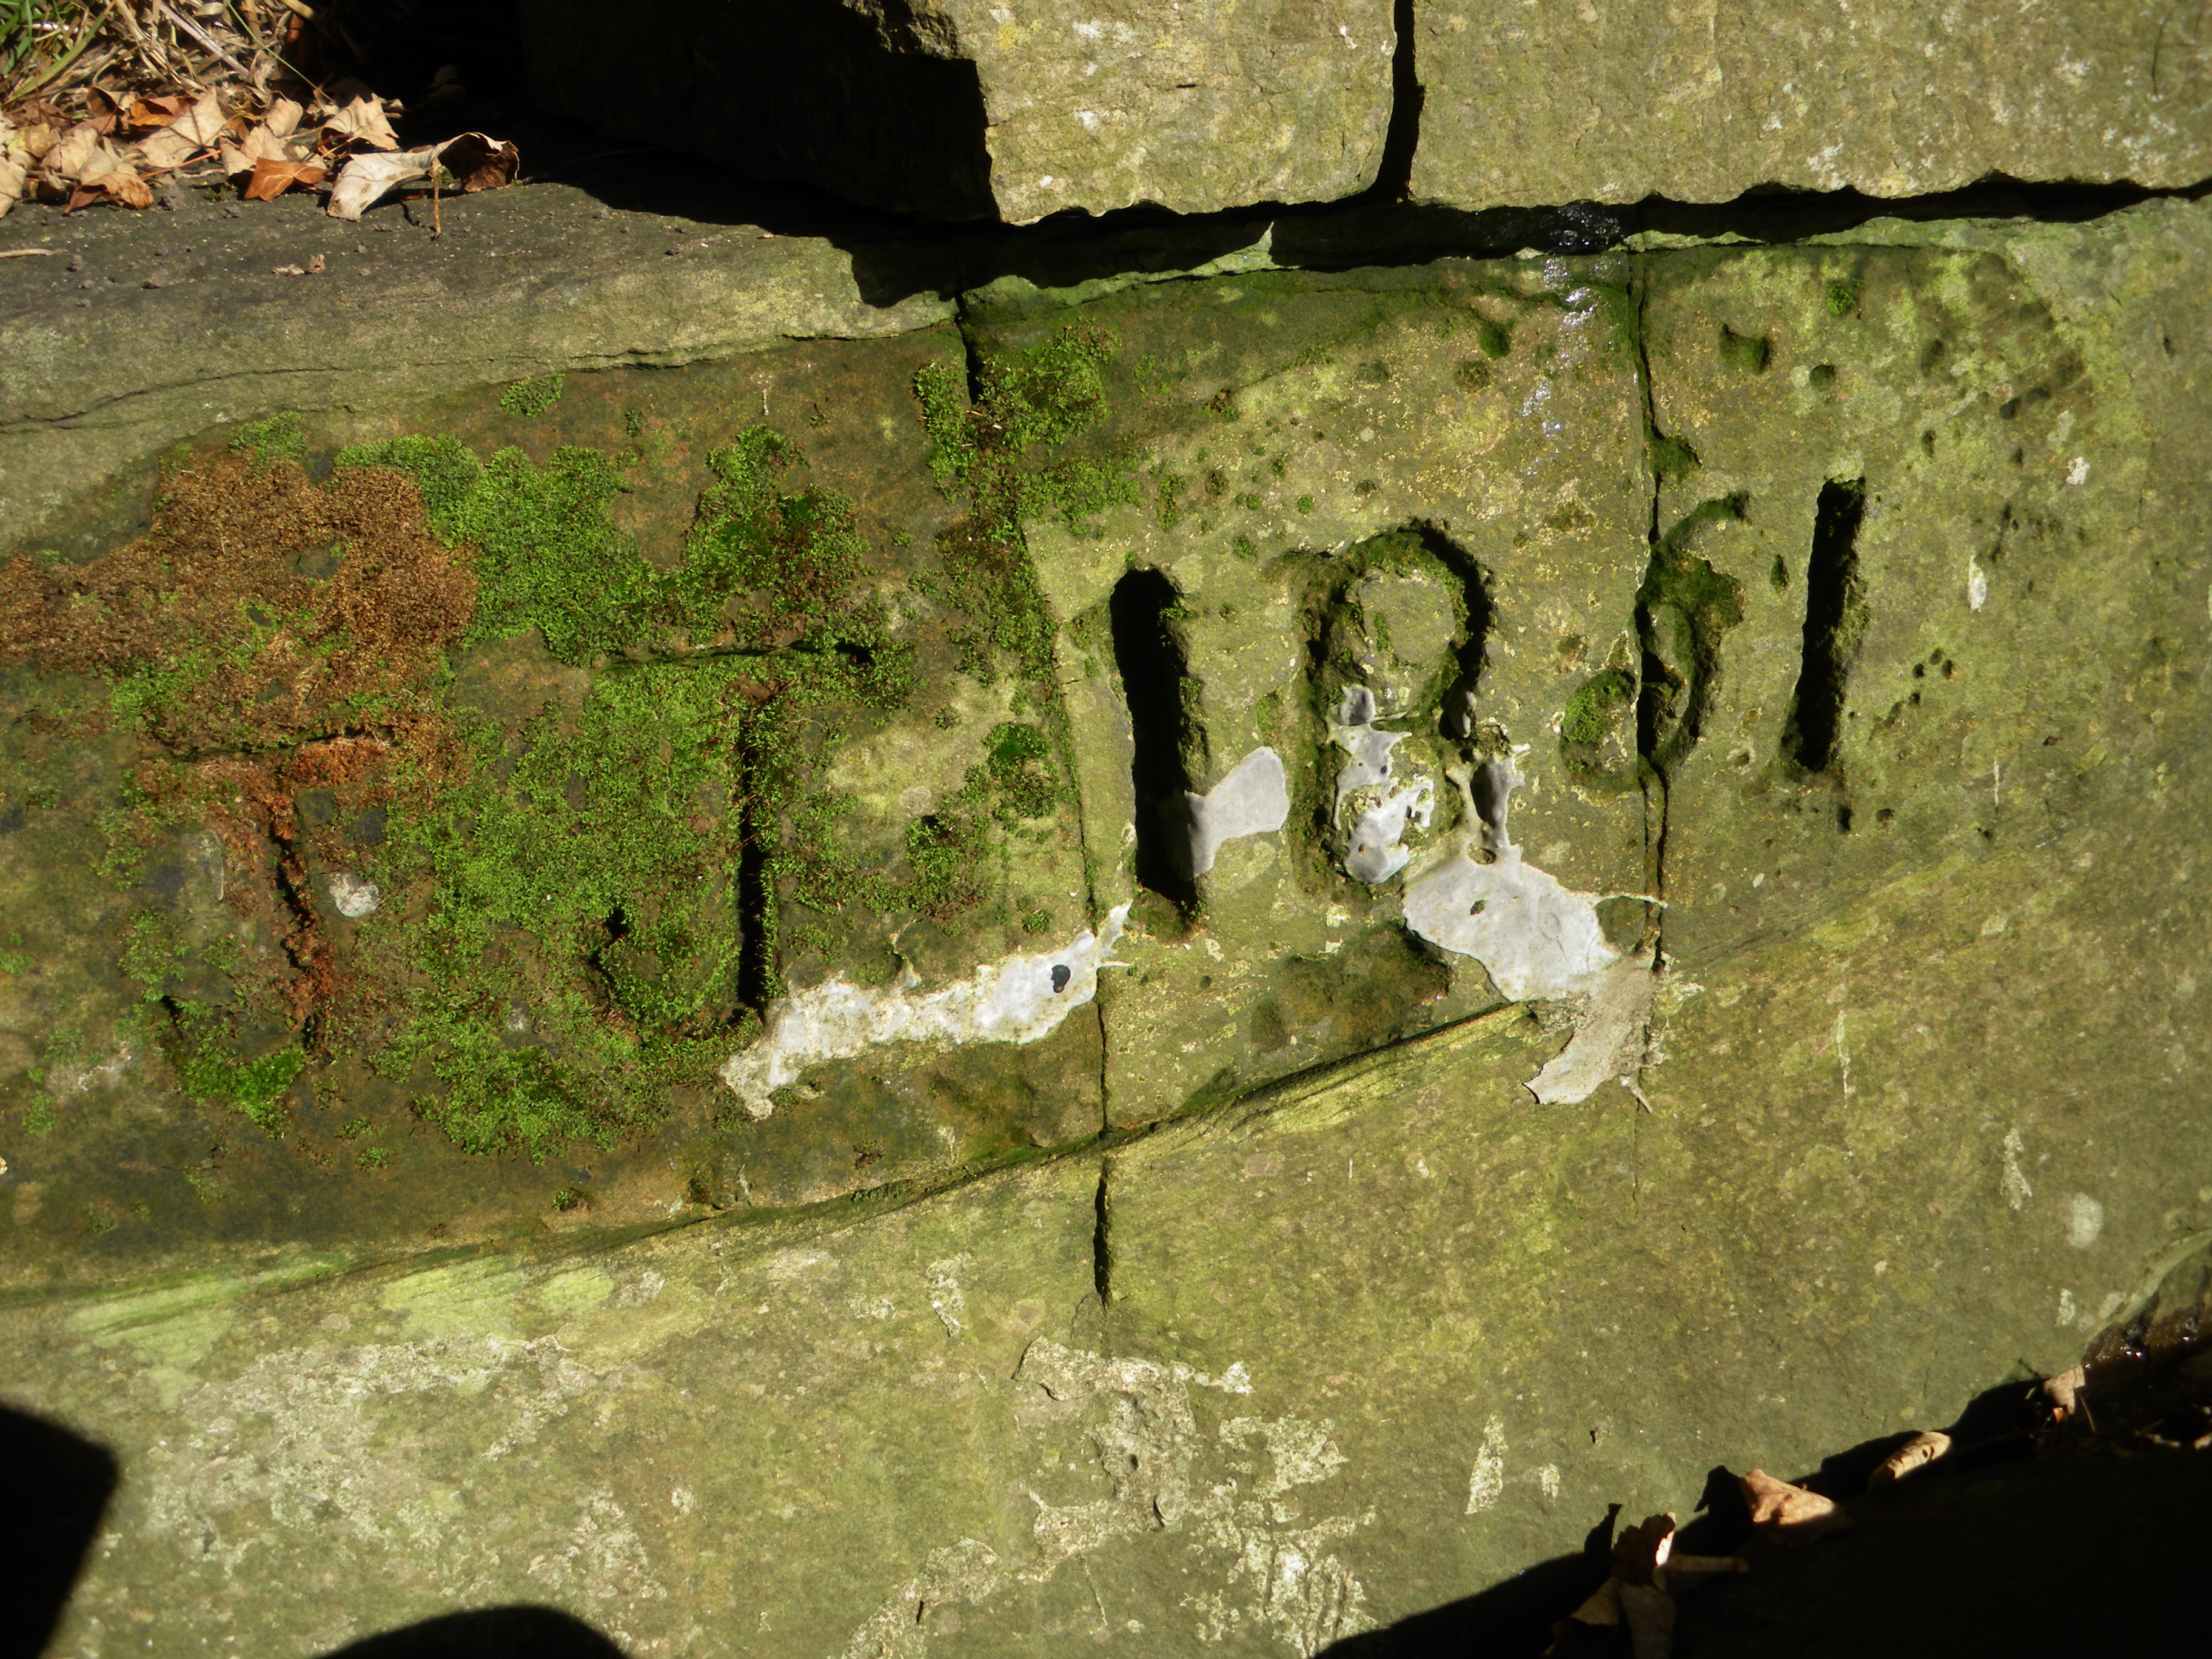 JJ 1861 (Jonathan Jowett) is carved on rocks below the Millennium Bridge. It marks where a sough driven from Eaves Knoll Colliery, above Meadow Street exits into the river Goyt. Its not hard to imagine JJ wanting to mark the completion of so long a shaft.